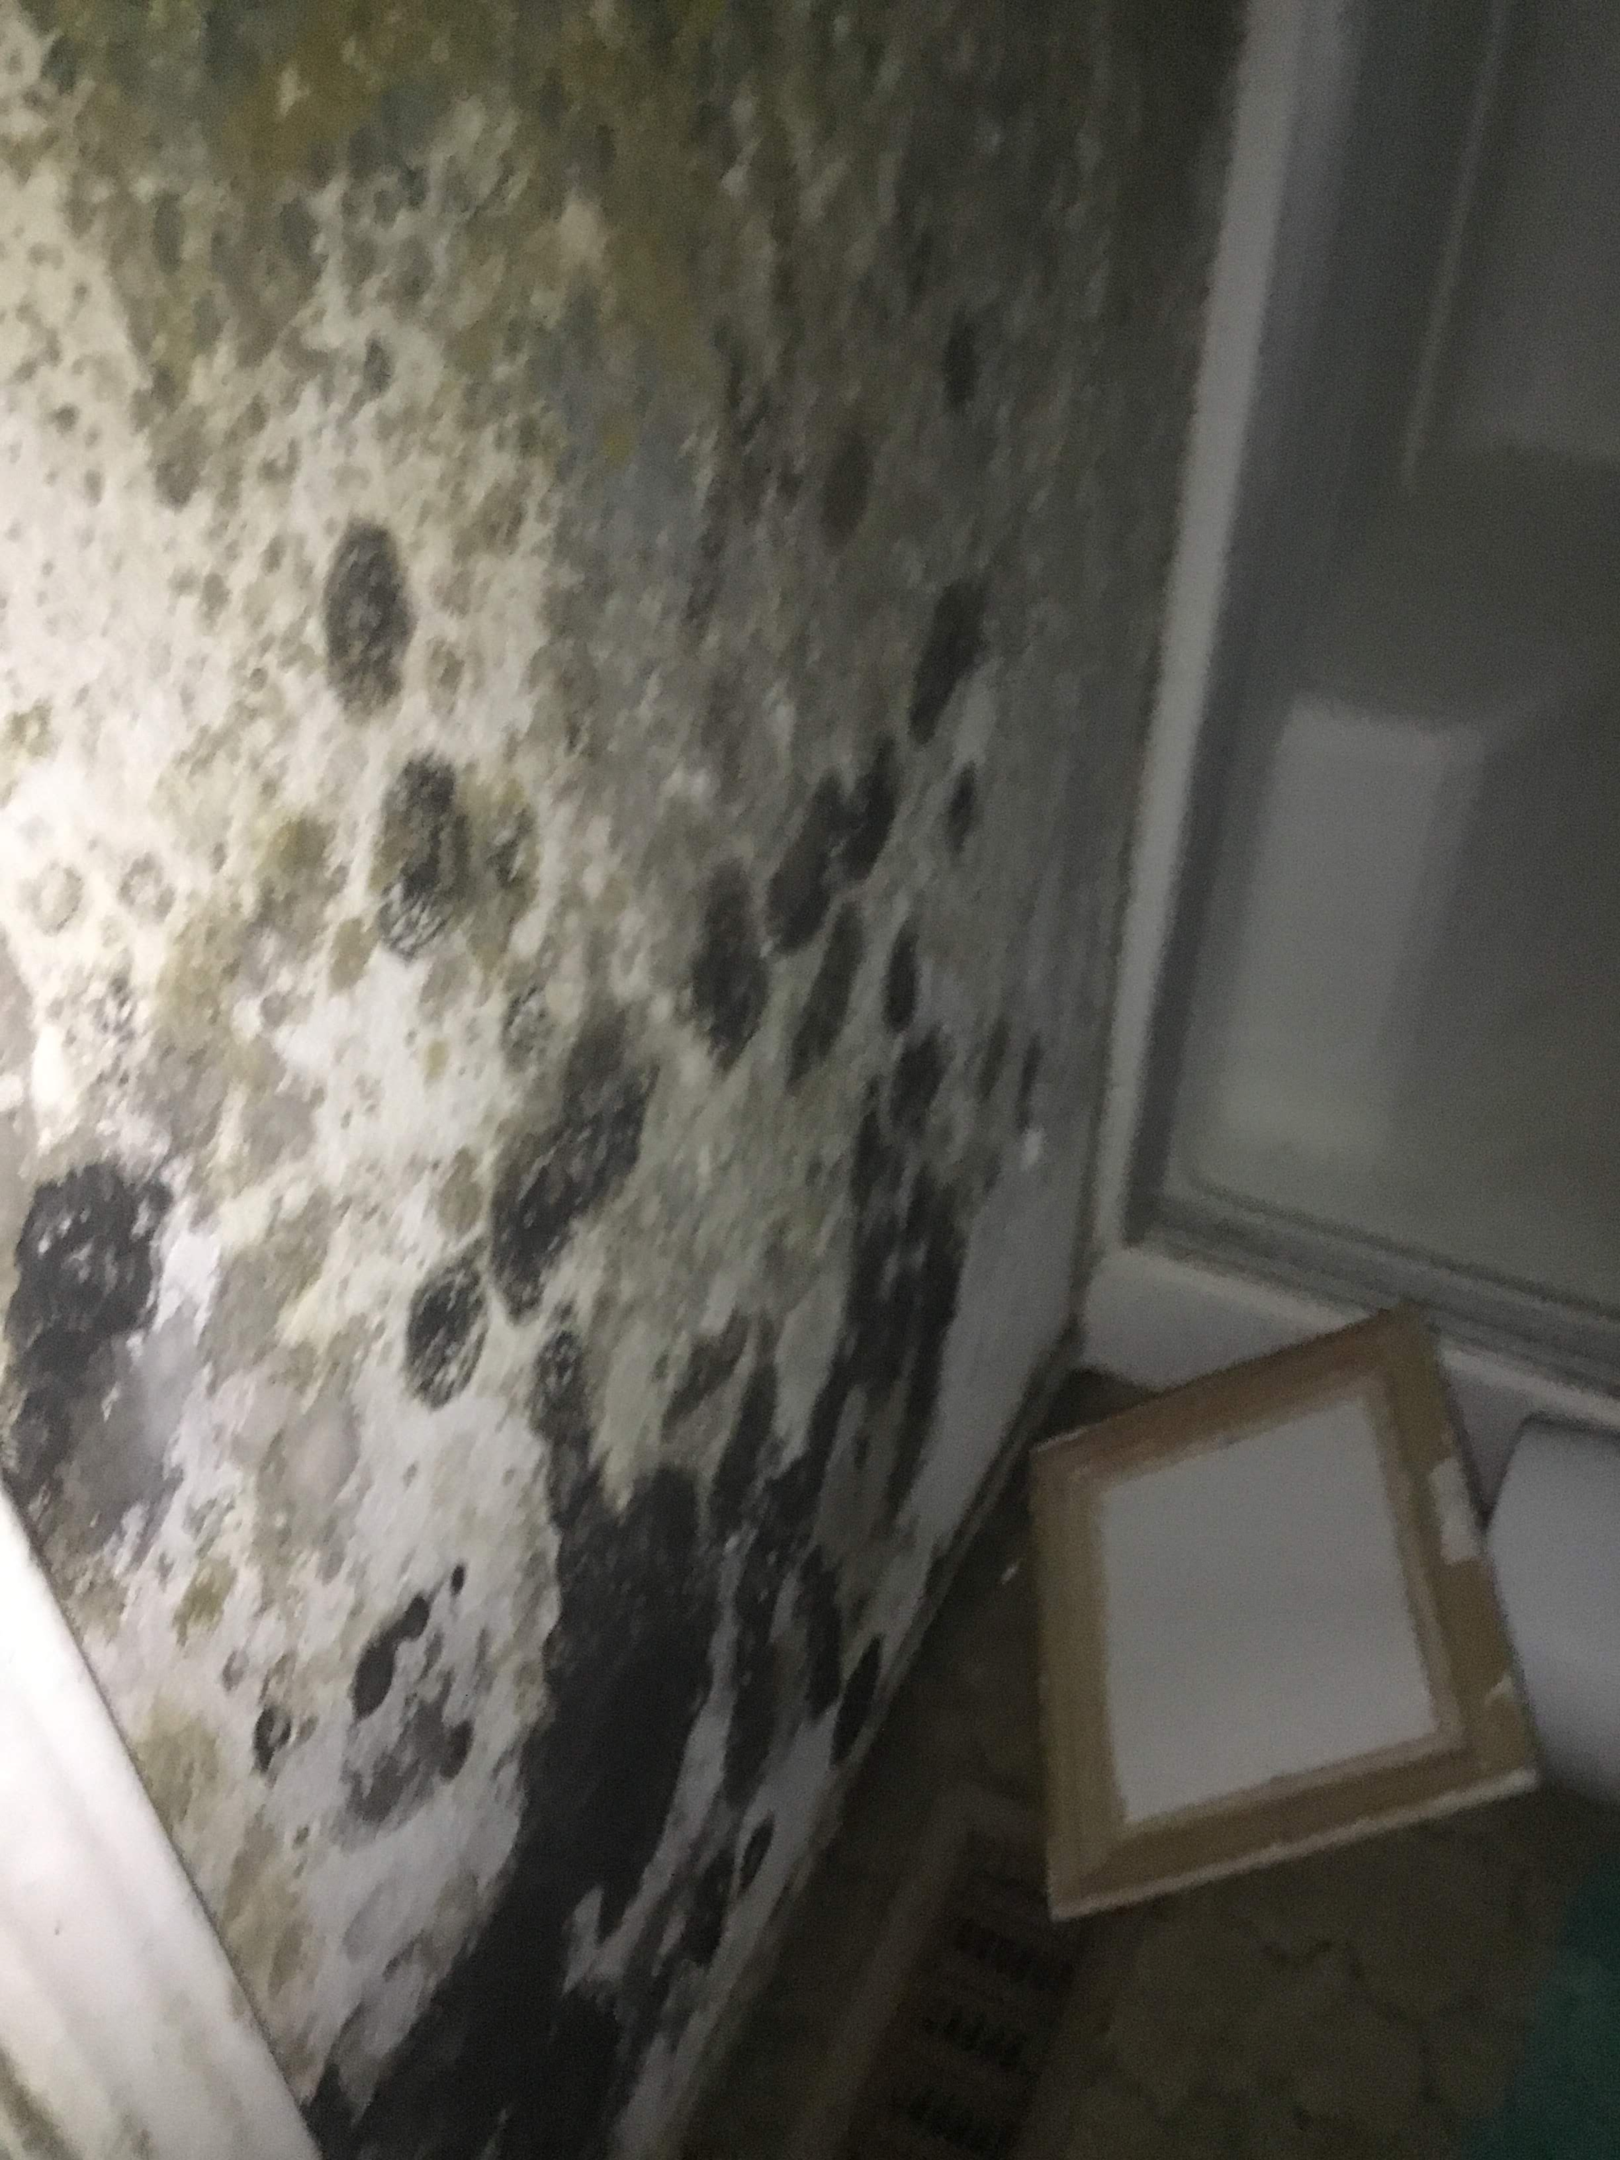 A picture of a person inspecting a house for mold